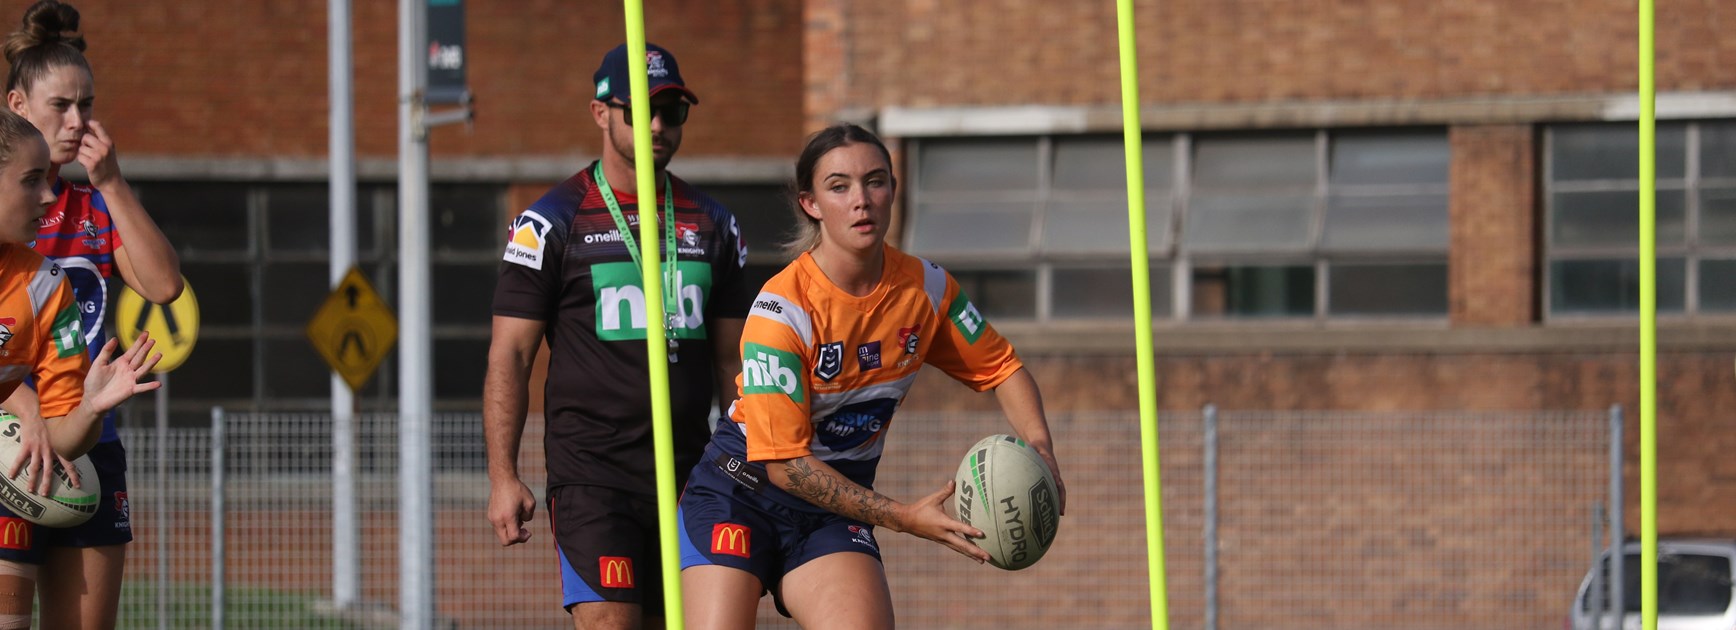 Tarsha Gale Cup side ready for finals series after scintillating season